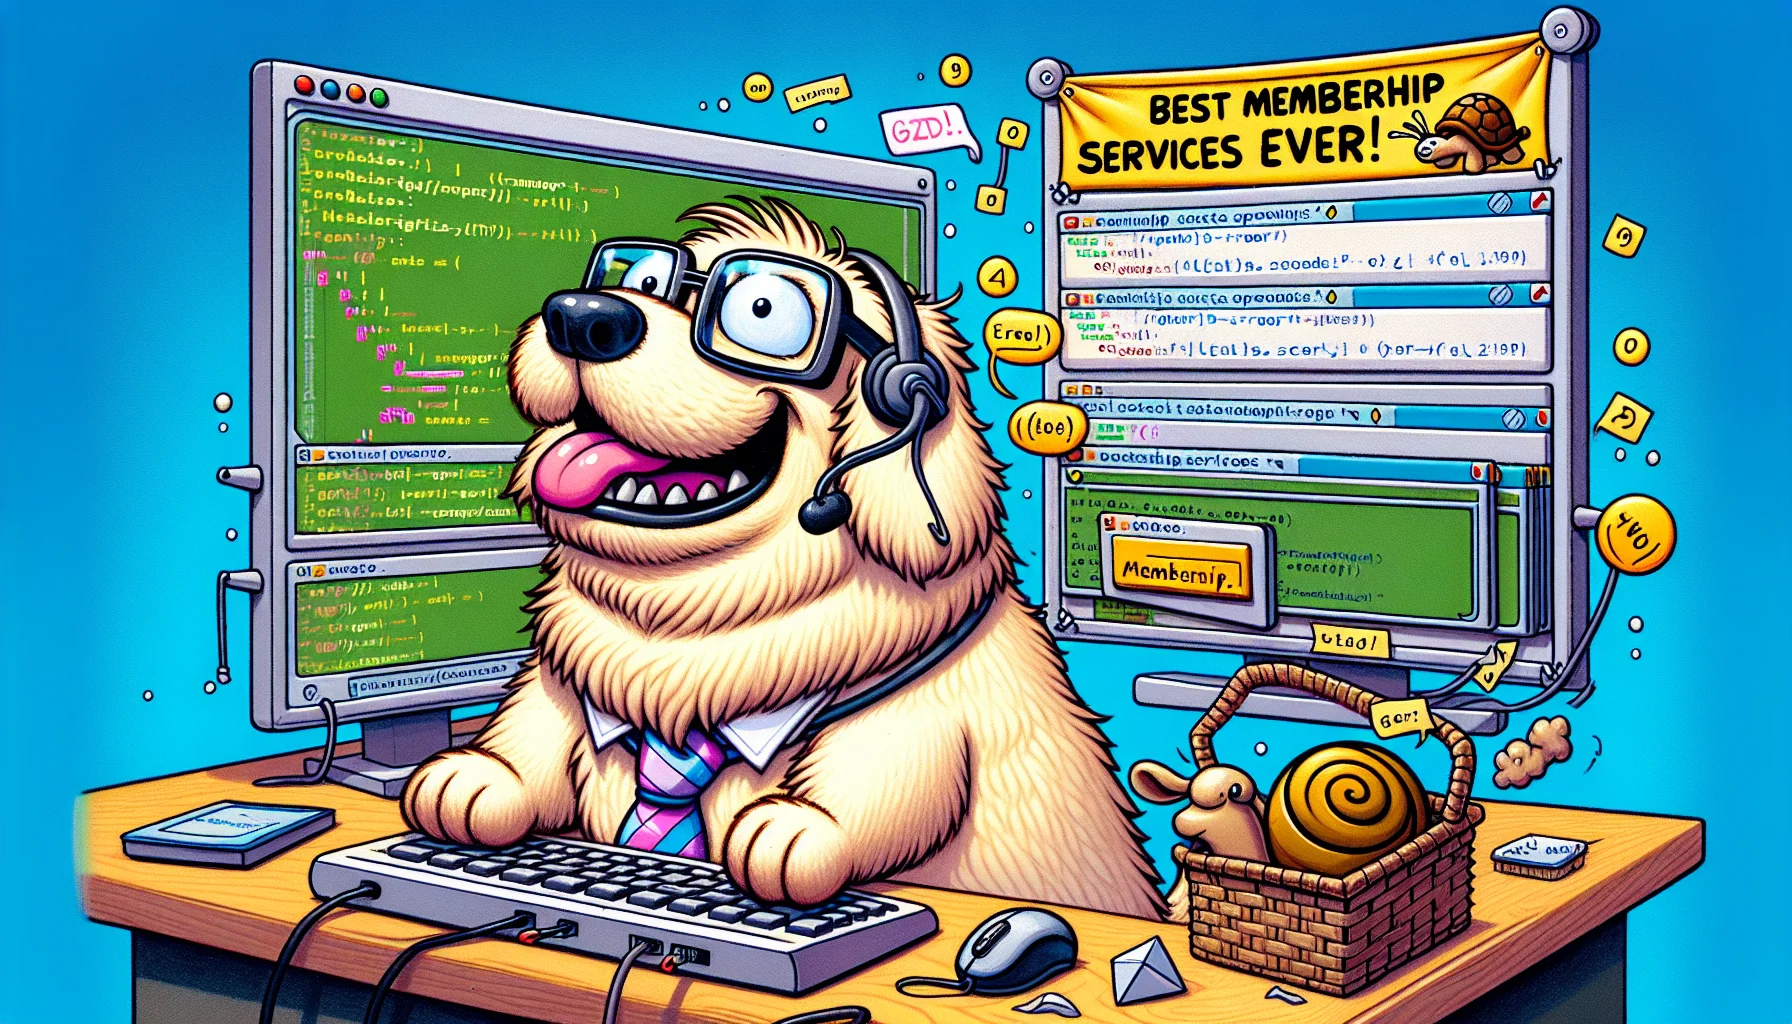 Imagine a humor-filled scenario with a cartoon animal—a chubby golden retriever with glasses and a tie. The dog is sat at a high-tech computer desk, operating an intricate panel of screens displaying code and web designs. The screens show multiple stages of a membership website being created. The retriever, donned with a headset and microphone, grins excitedly at the progress being made, while a banner hangs overhead declaring 'Best Hosting Services Ever!'. Various comedic elements could include little error pop-ups being swatted away by the retriever's paw or a progress bar that's moving with a tortoise symbol next to it.